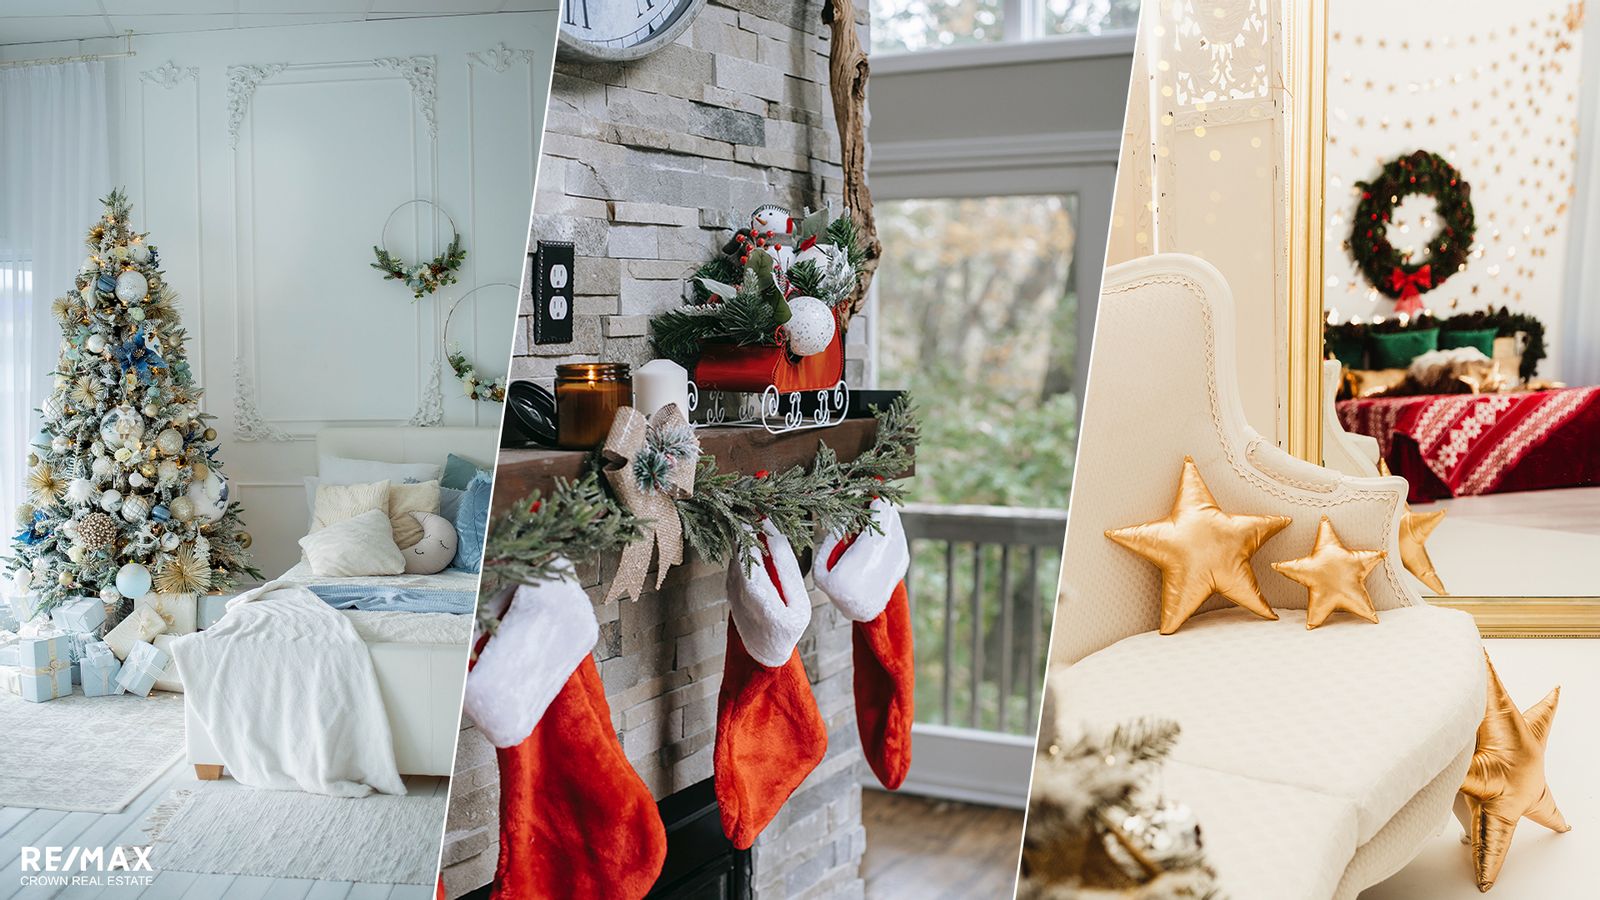 How to Stage Your Home During the Holidays